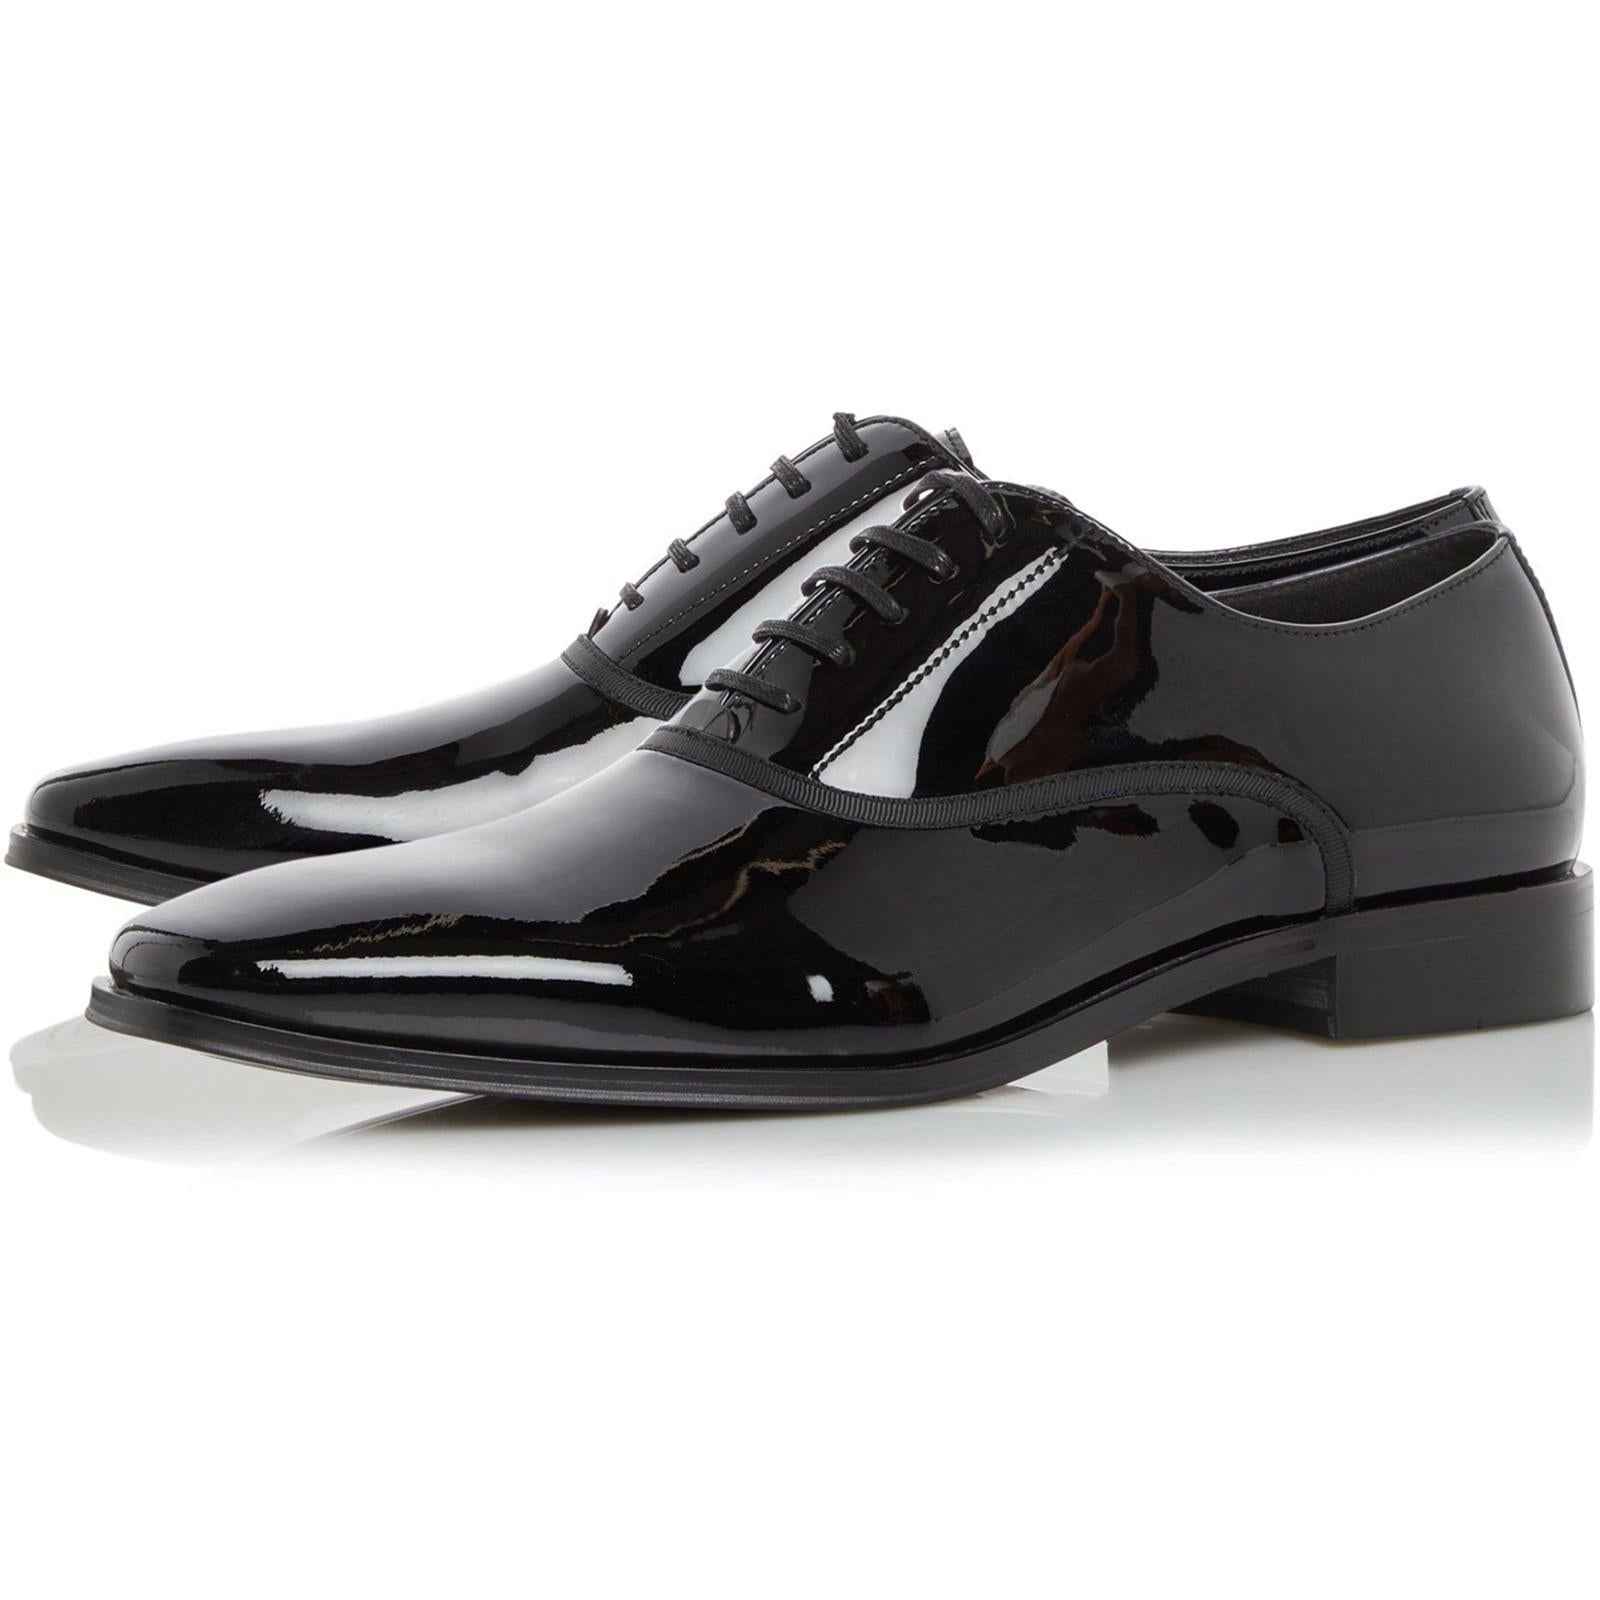 Dune London Swan Oxford Shoes